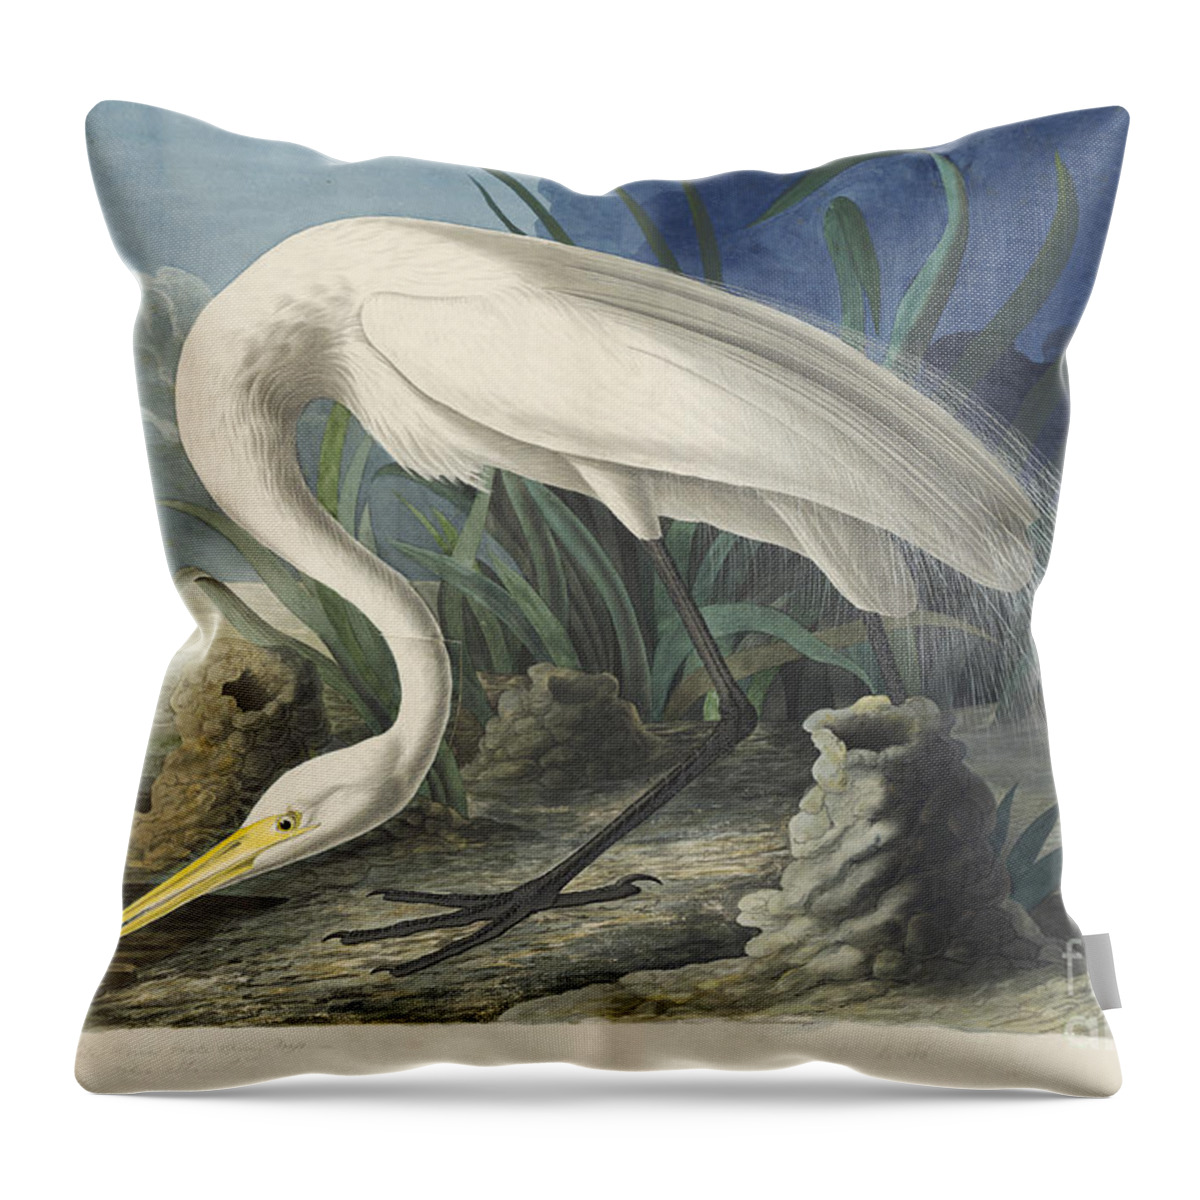 Audubon Throw Pillow featuring the drawing Great White Egret by Celestial Images